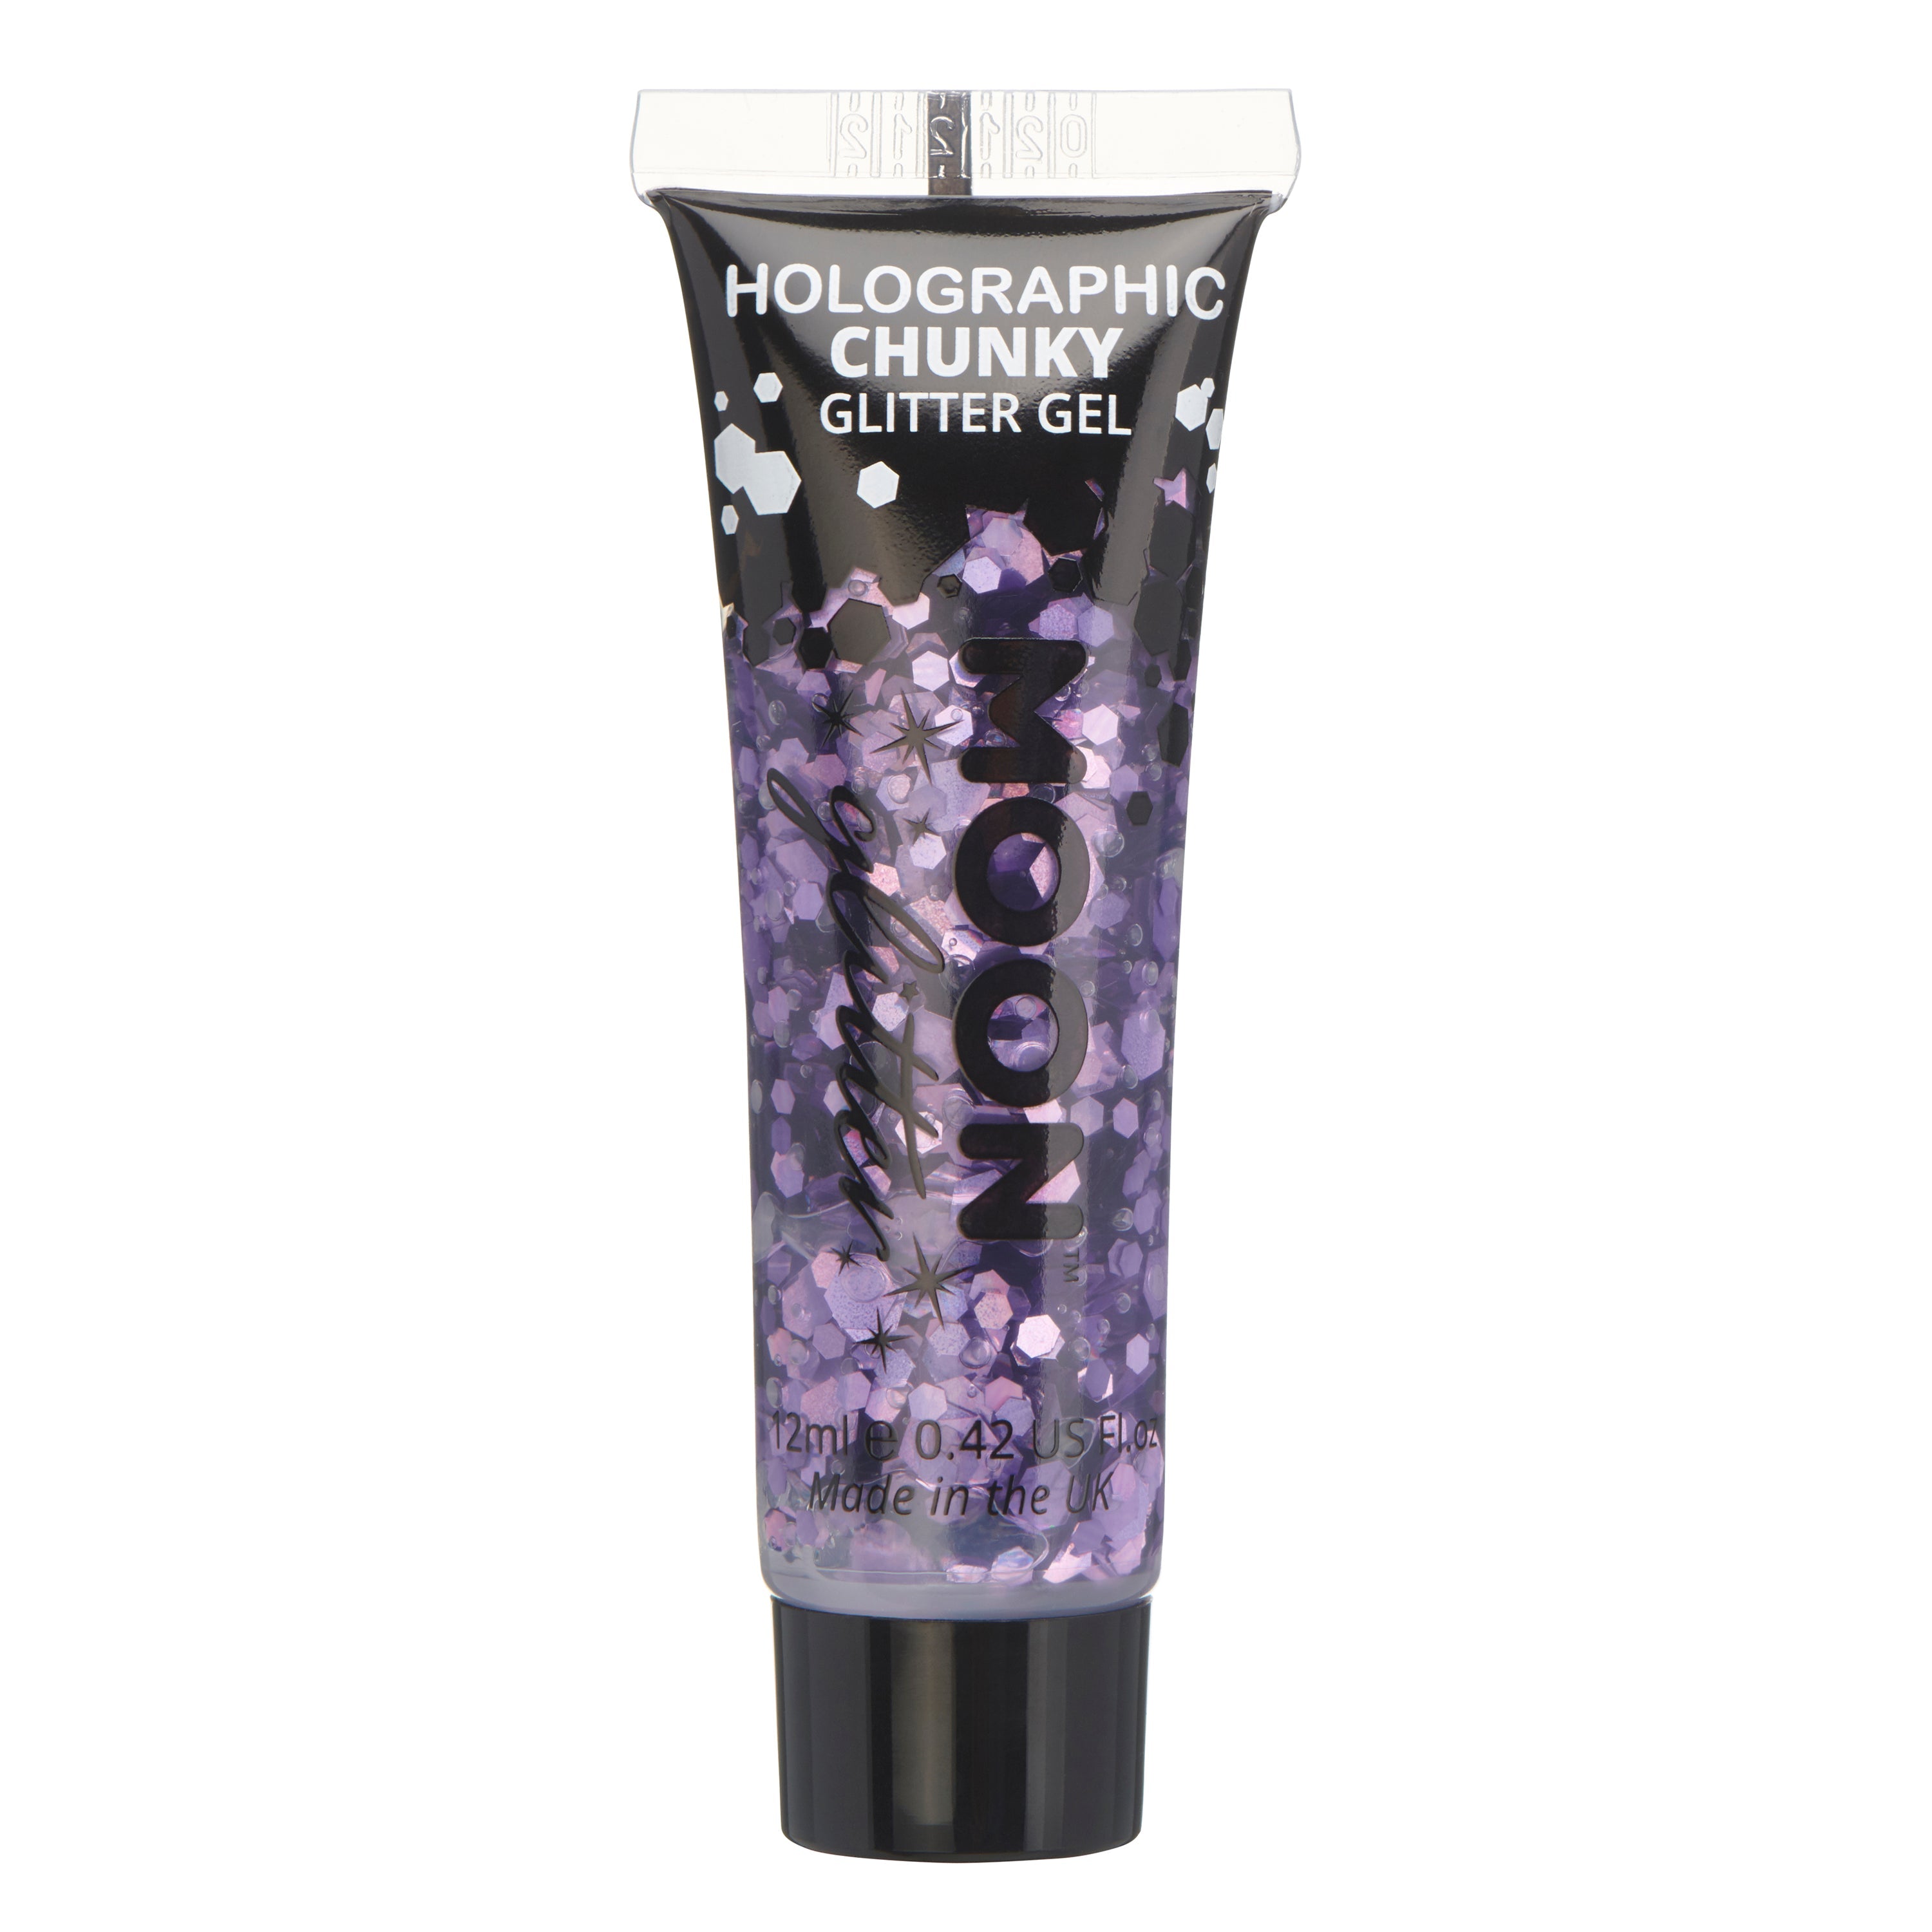 Purple - Holographic Chunky Face & Body Glitter Gel, 12mL. Cosmetically certified, FDA & Health Canada compliant, cruelty free and vegan.